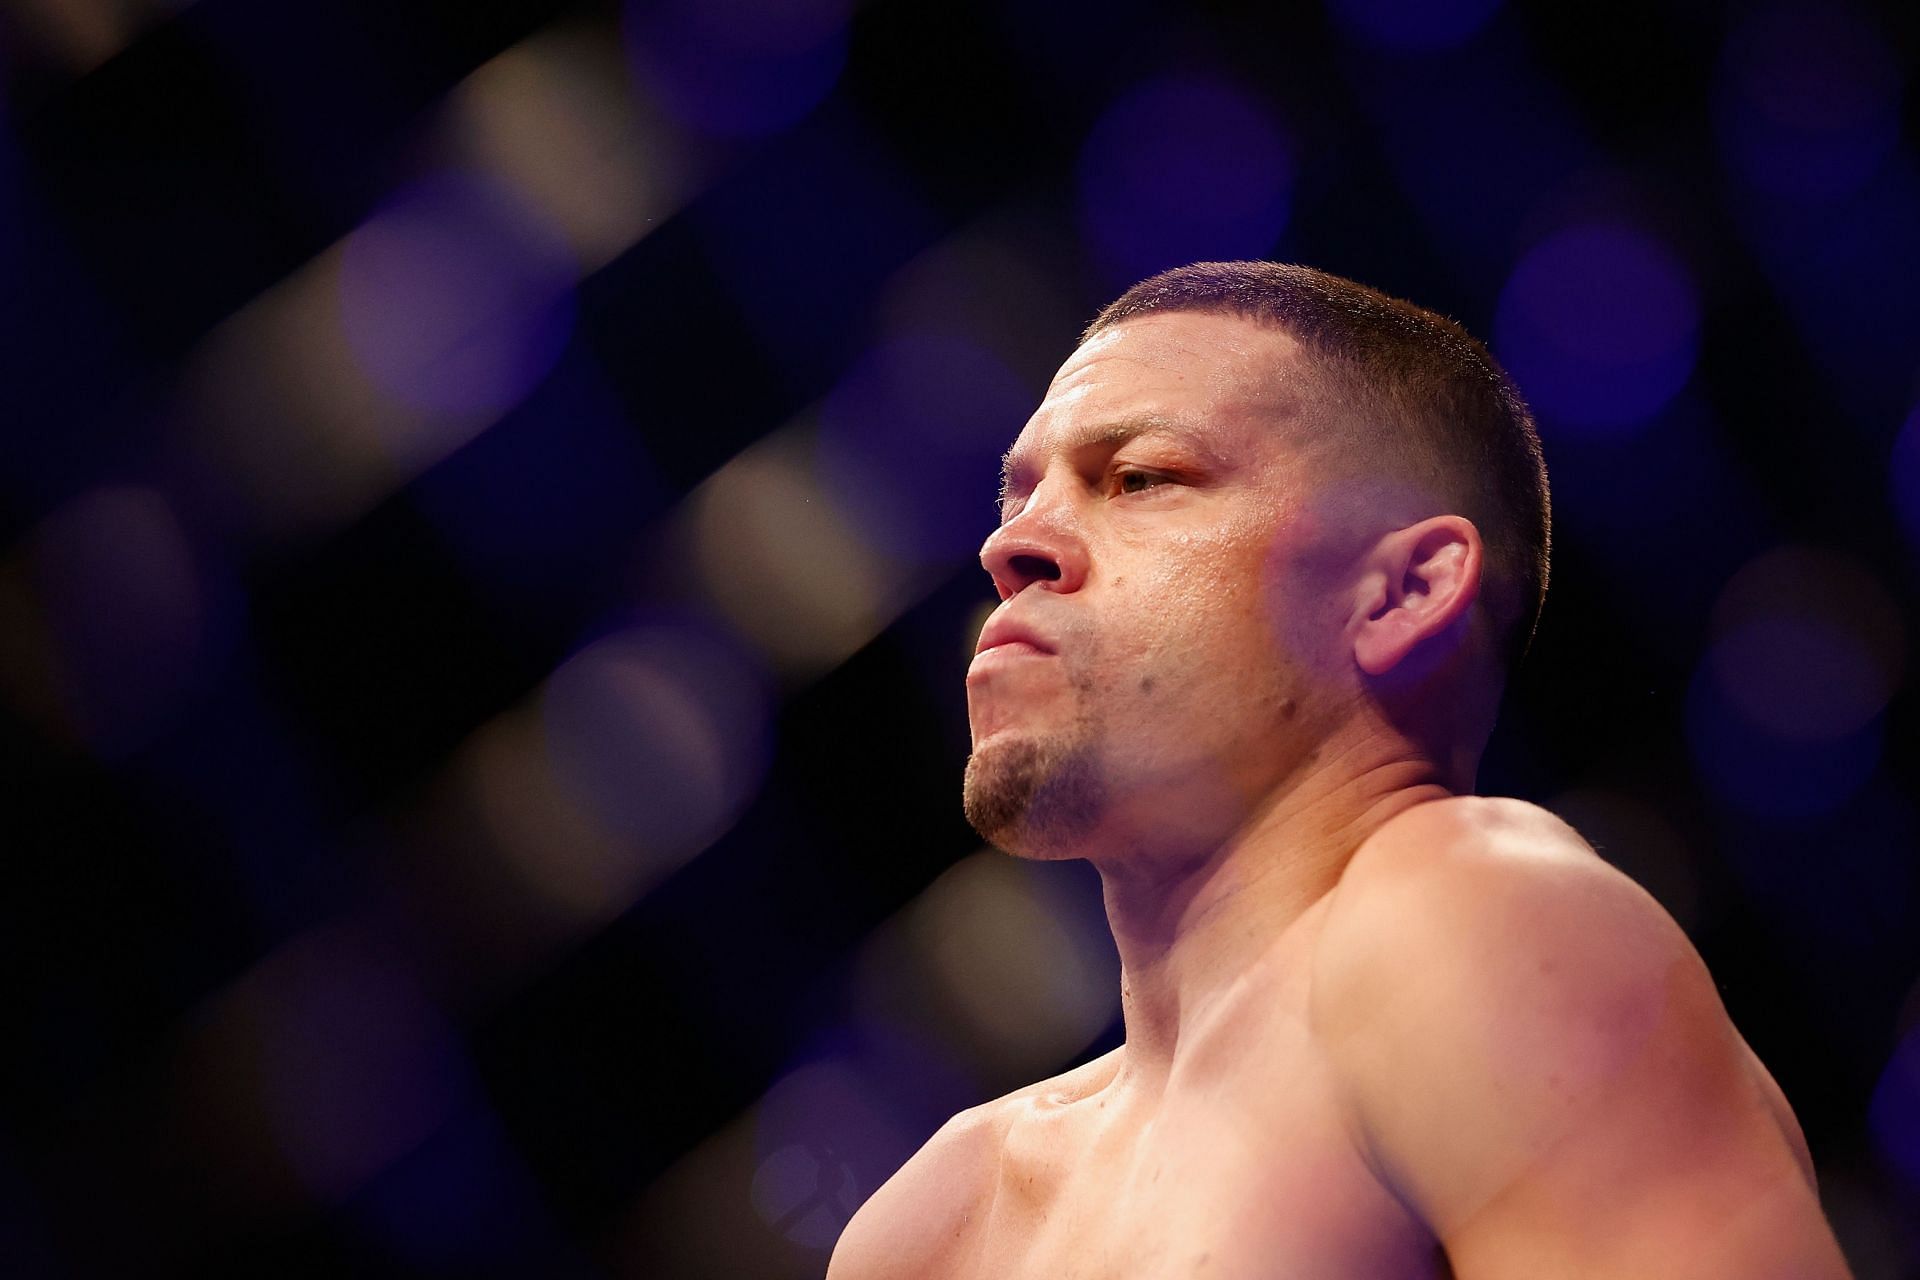 Nate Diaz holds a record of 20-13